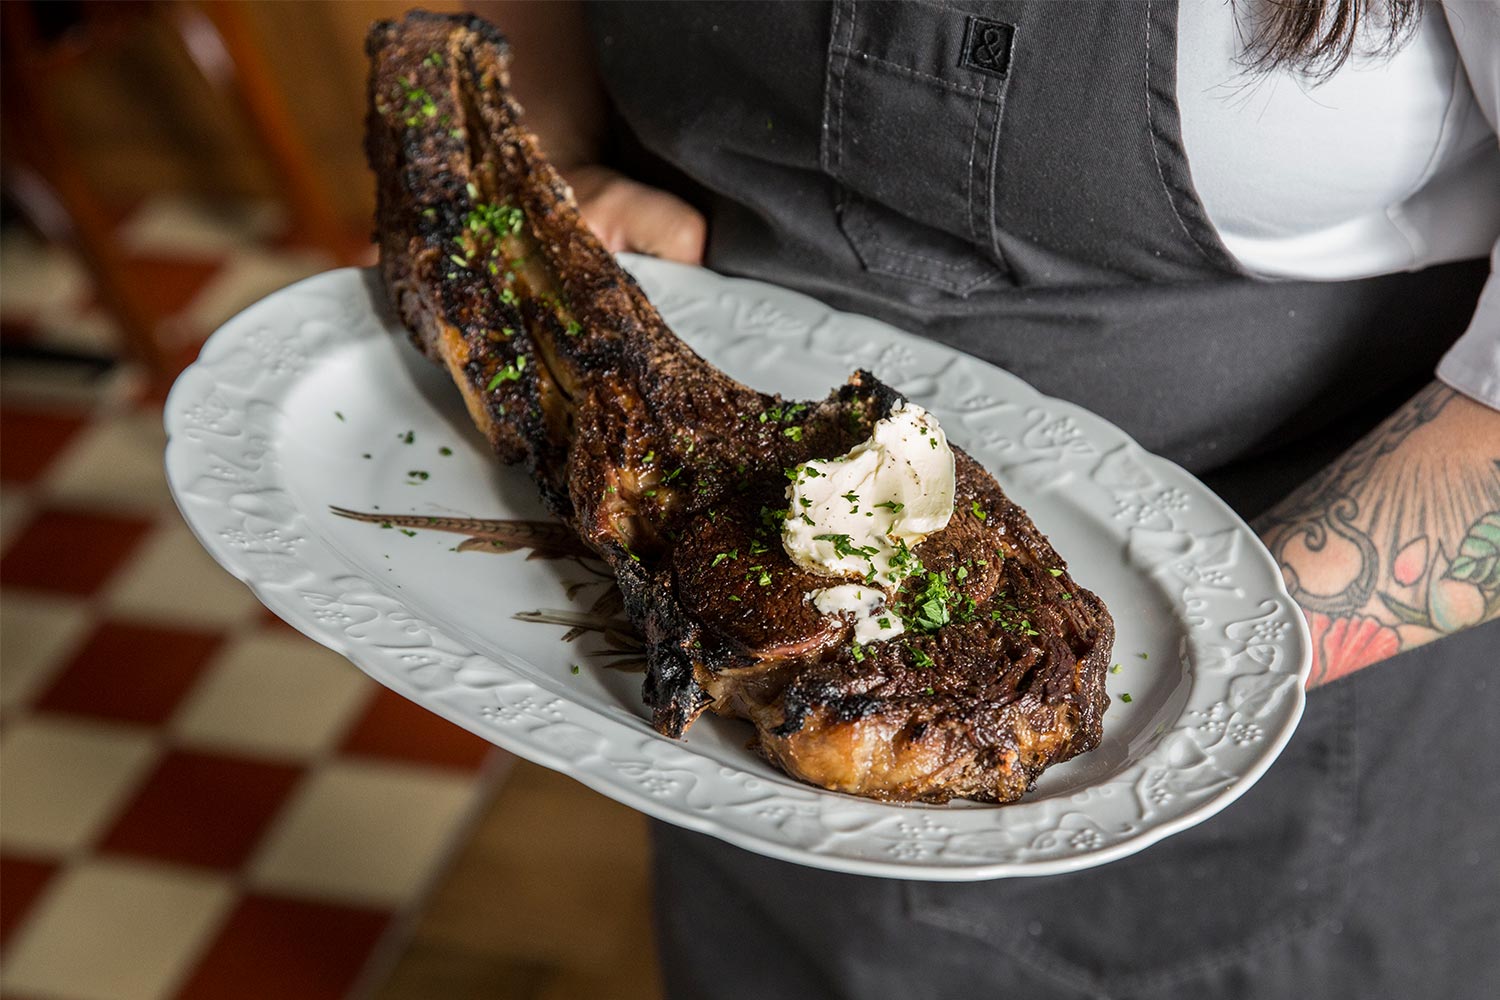 A waiter holding an ax handle steak at St. Anselm, one of the best steakhouses in Washington, D.C.